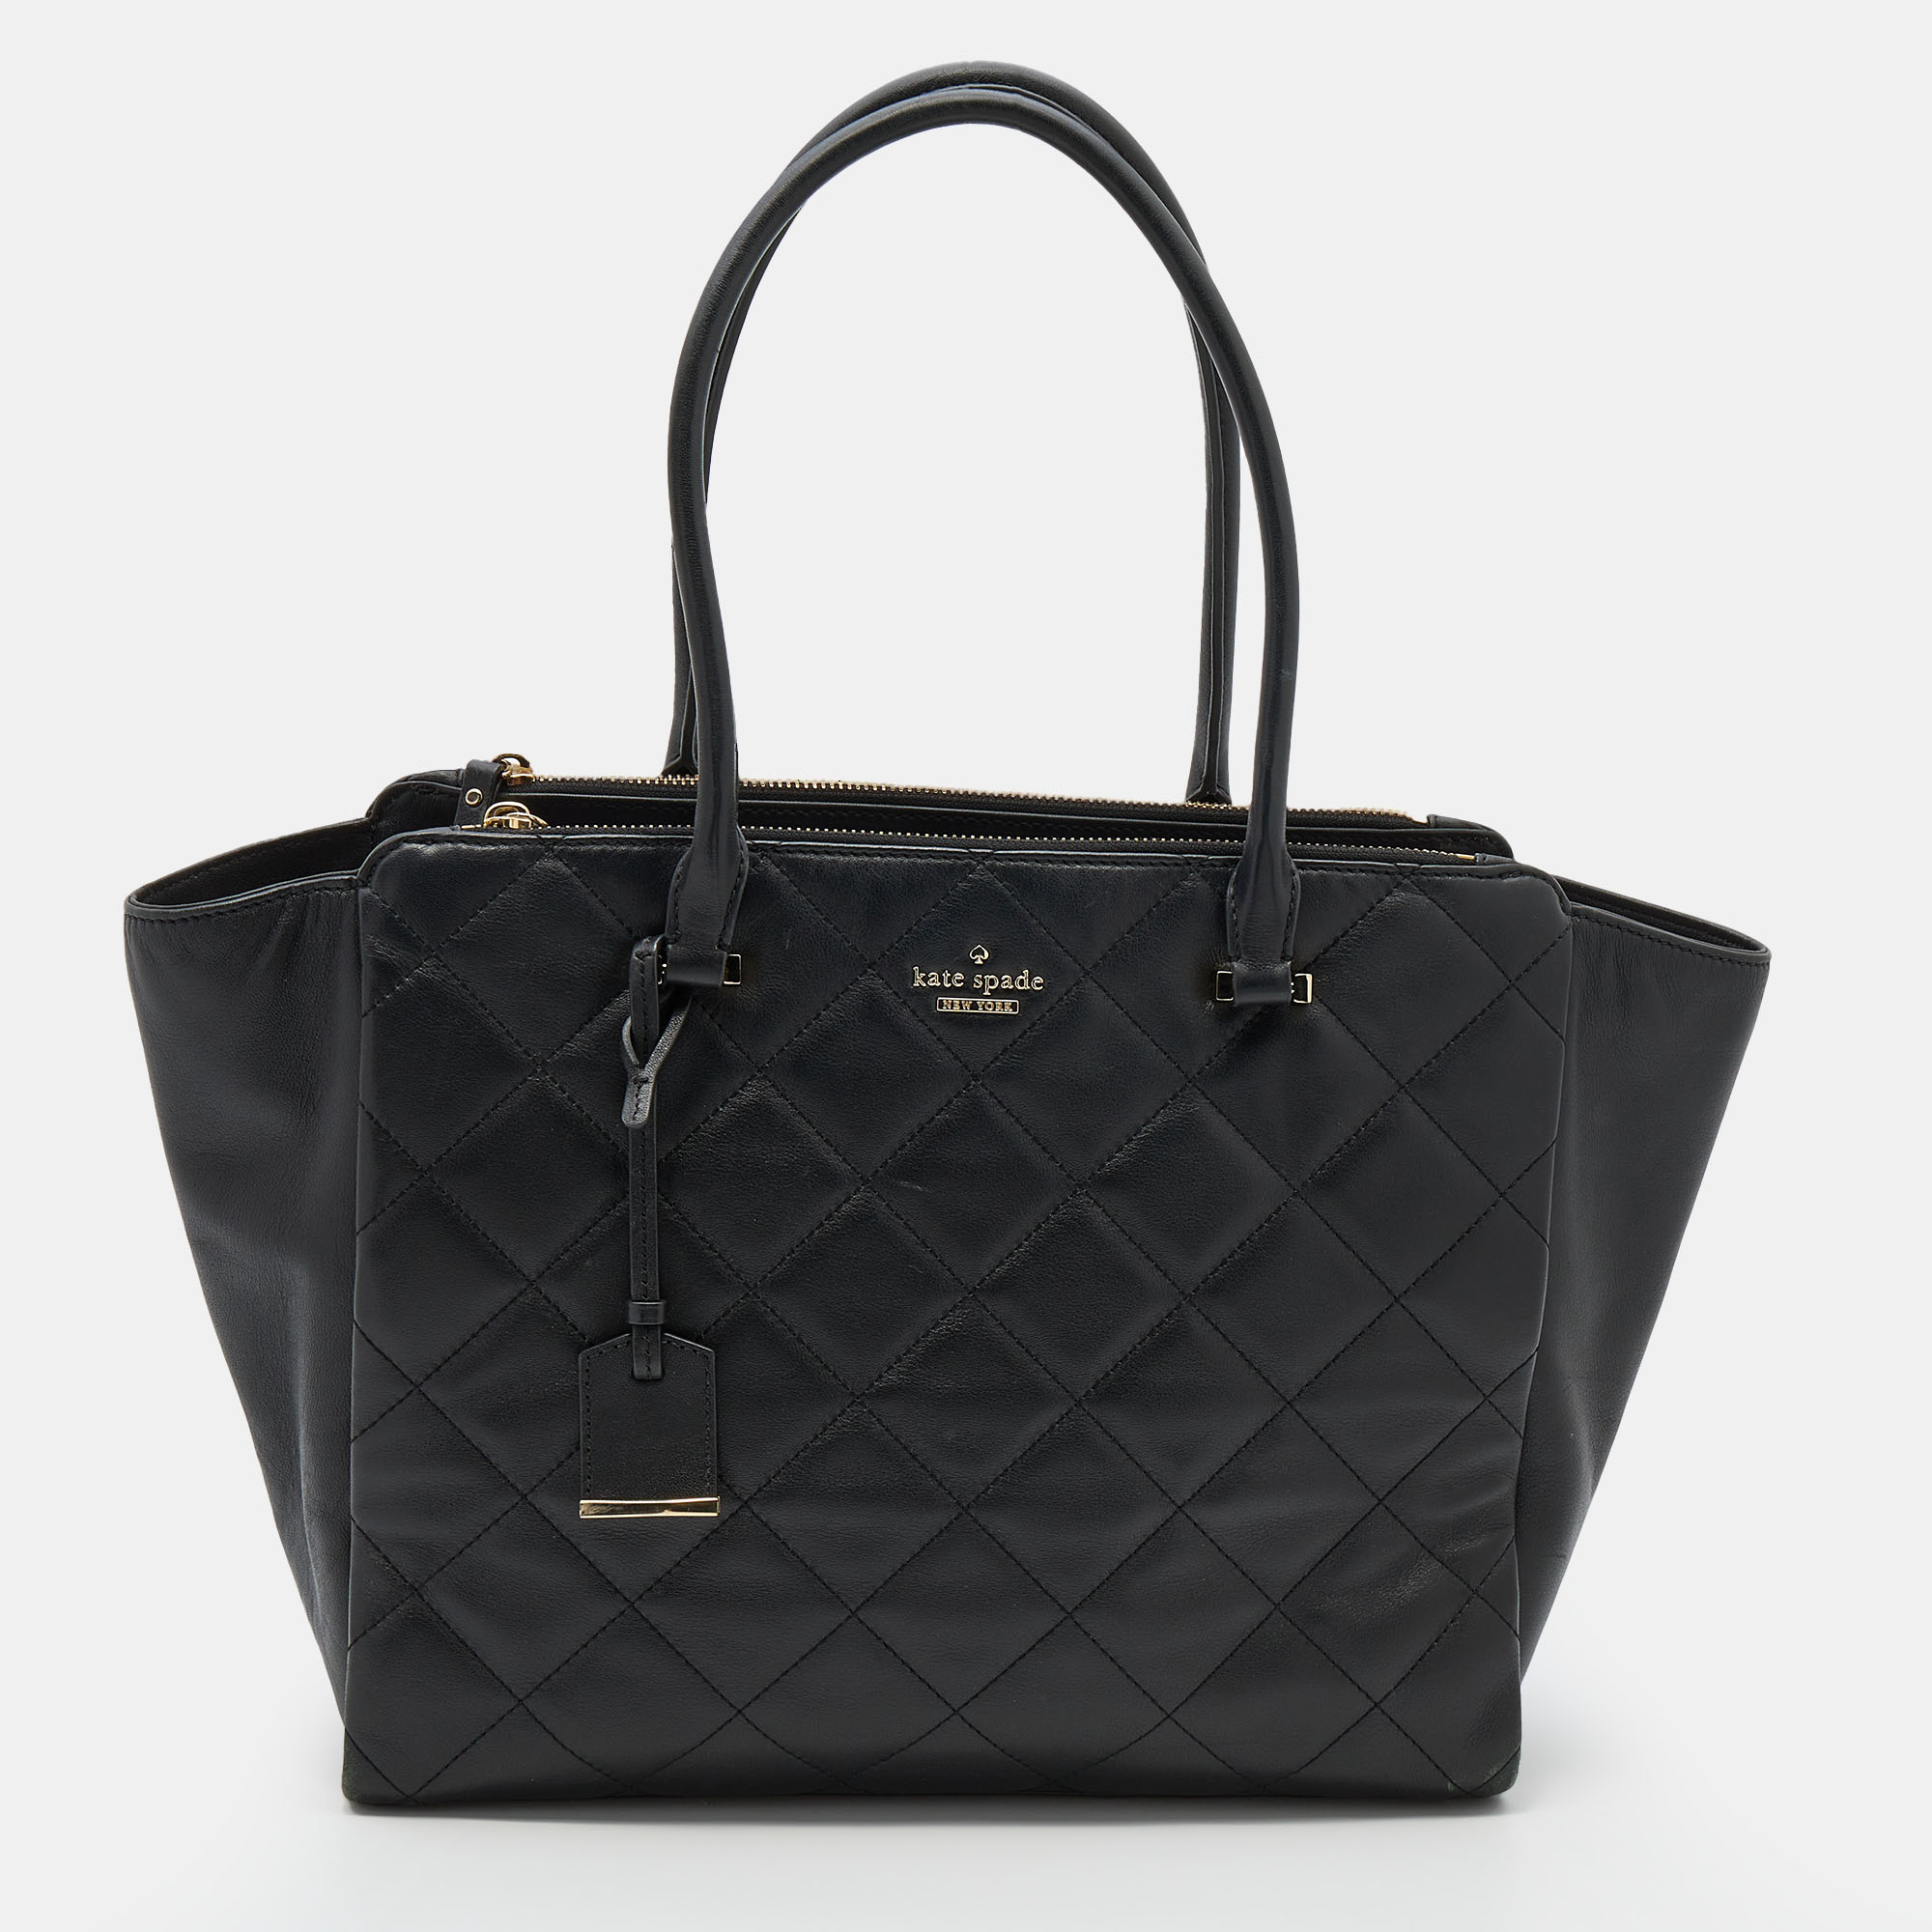 Pre-owned Kate Spade Black Quilted Leather Tote